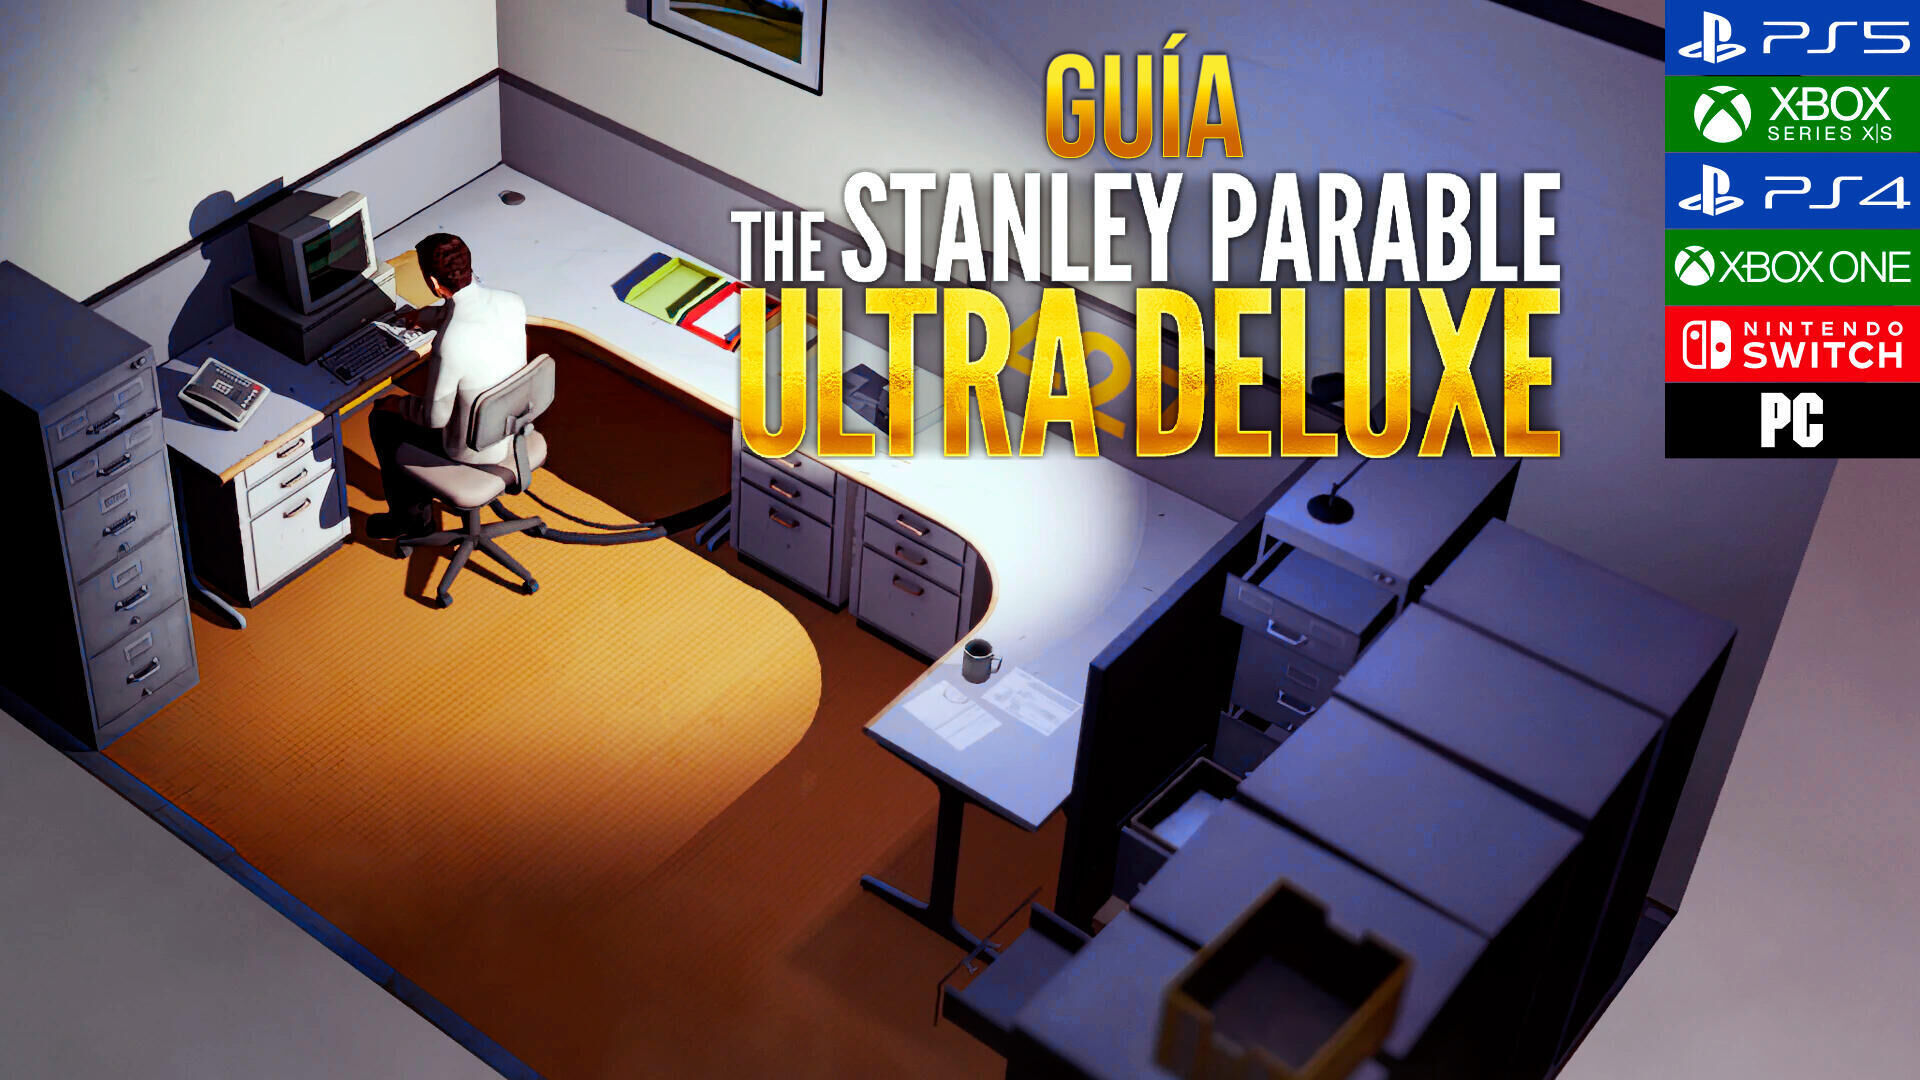 Parable ultra deluxe. Stanley Parable Ultra Deluxe Стэнли. Стэнли из the Stanley Parable. The Stanley Parable: Ultra Deluxe. Stanley Parable Deluxe Edition.